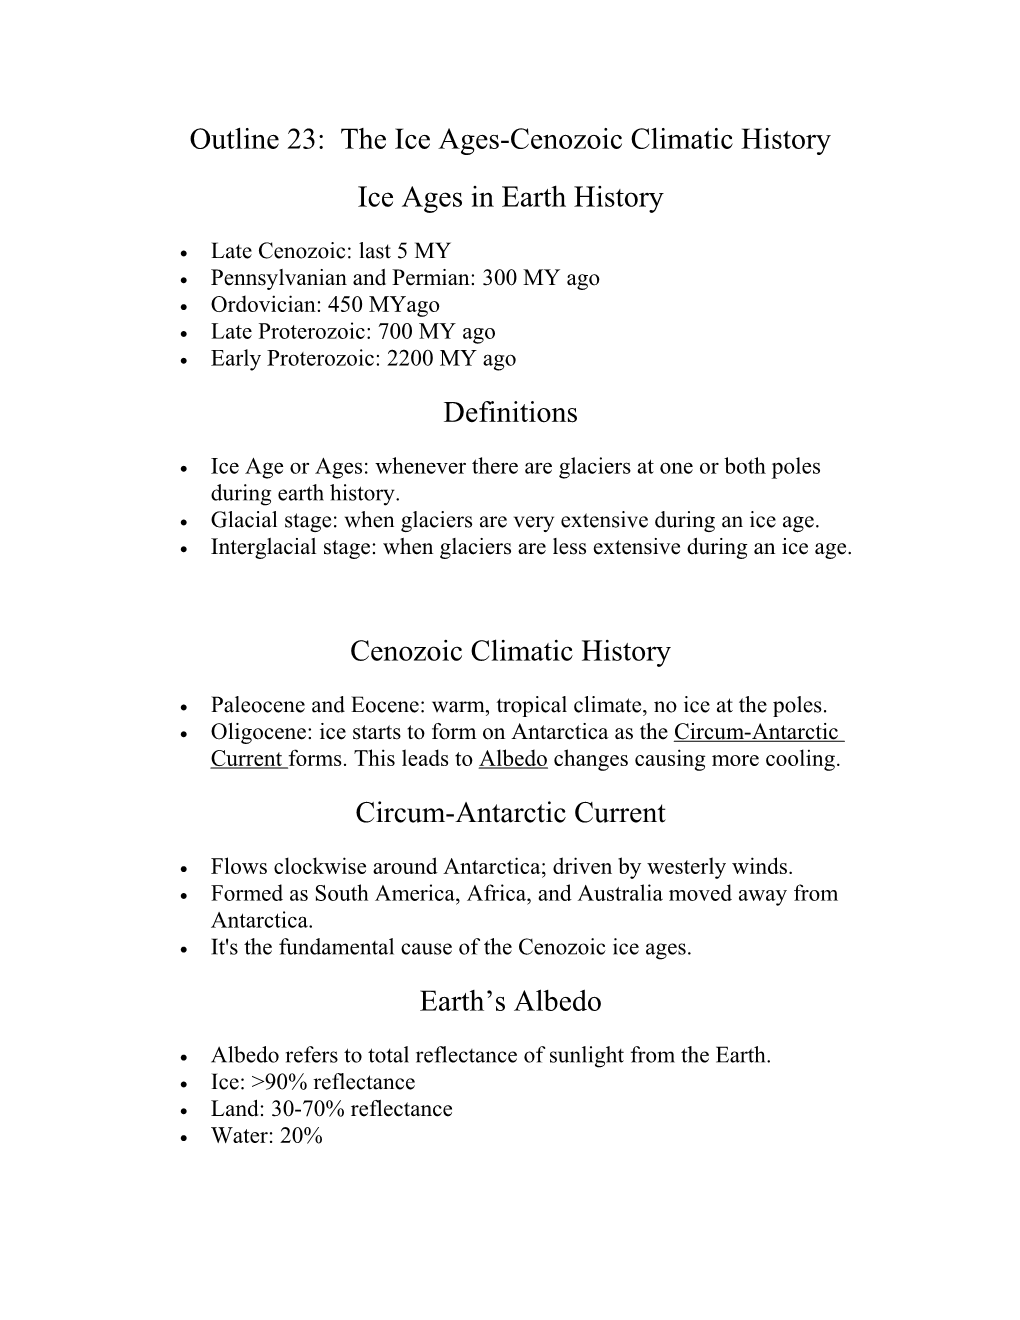 The Ice Ages-Cenozoic Climatic History